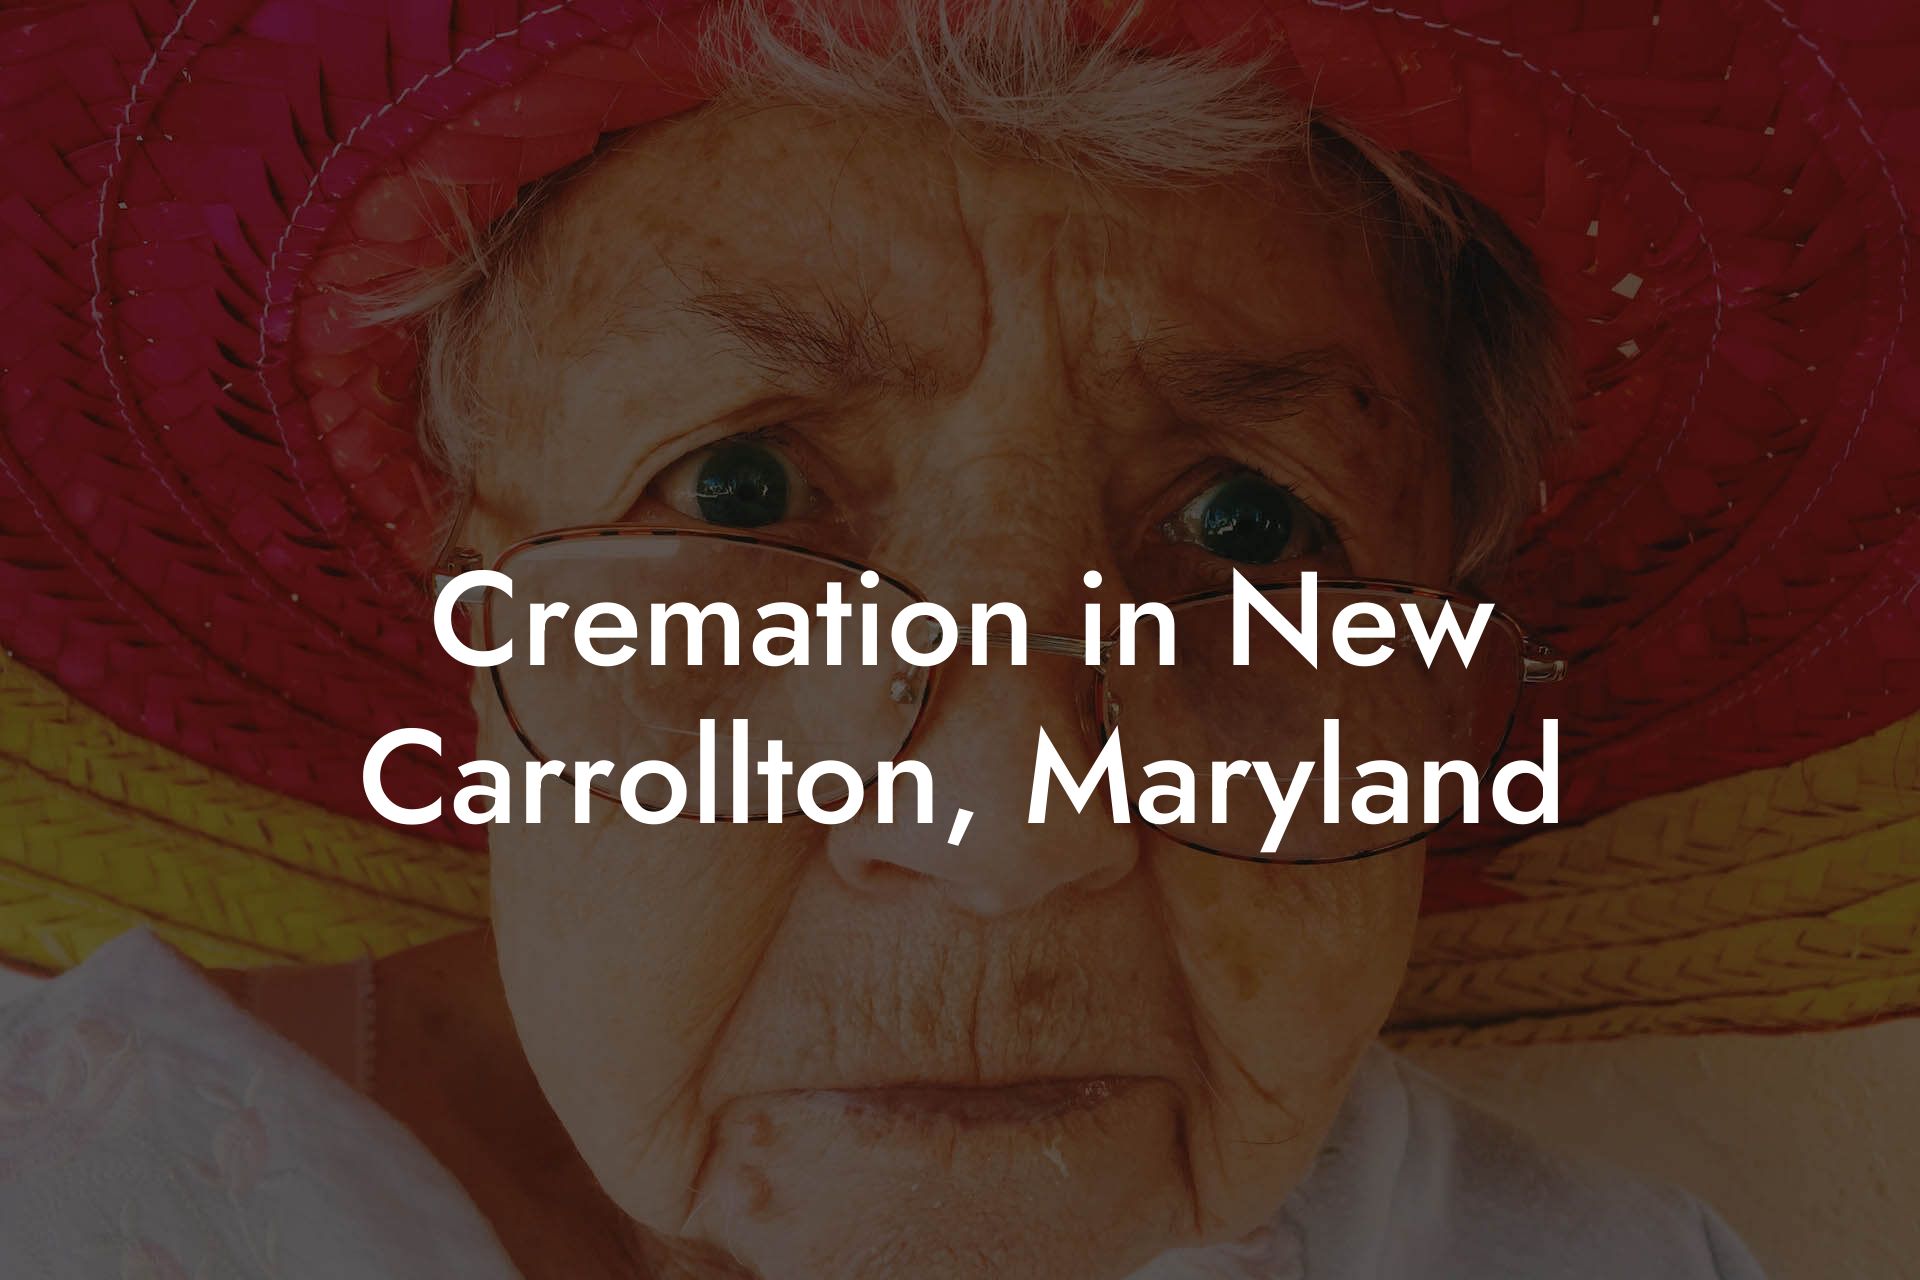 Cremation in New Carrollton, Maryland